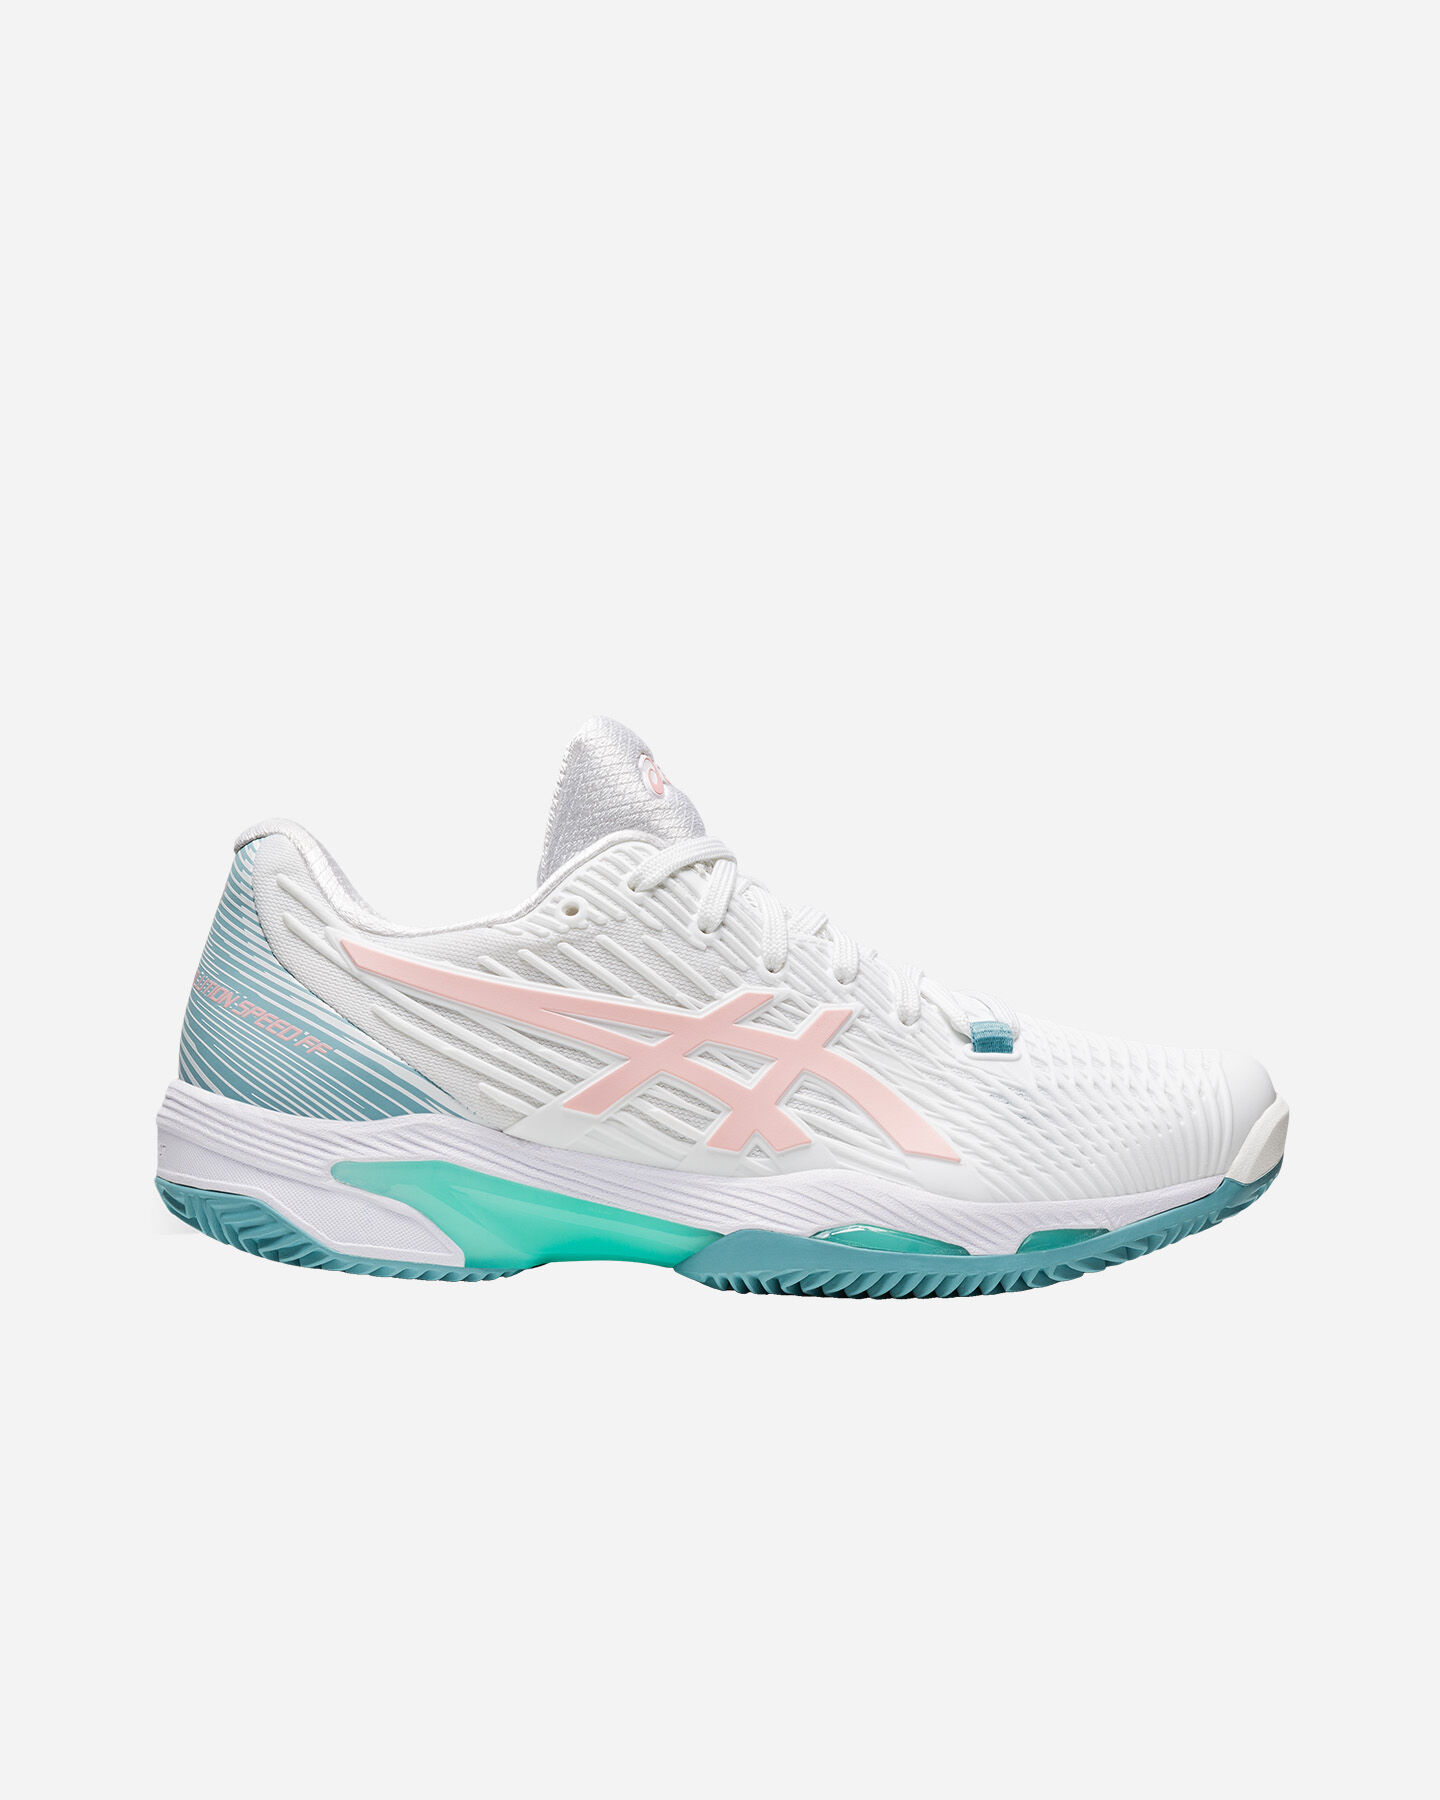  Scarpe tennis ASICS SOLUTION SPEED FF 2 CLAY W S5469495|404|6H scatto 0